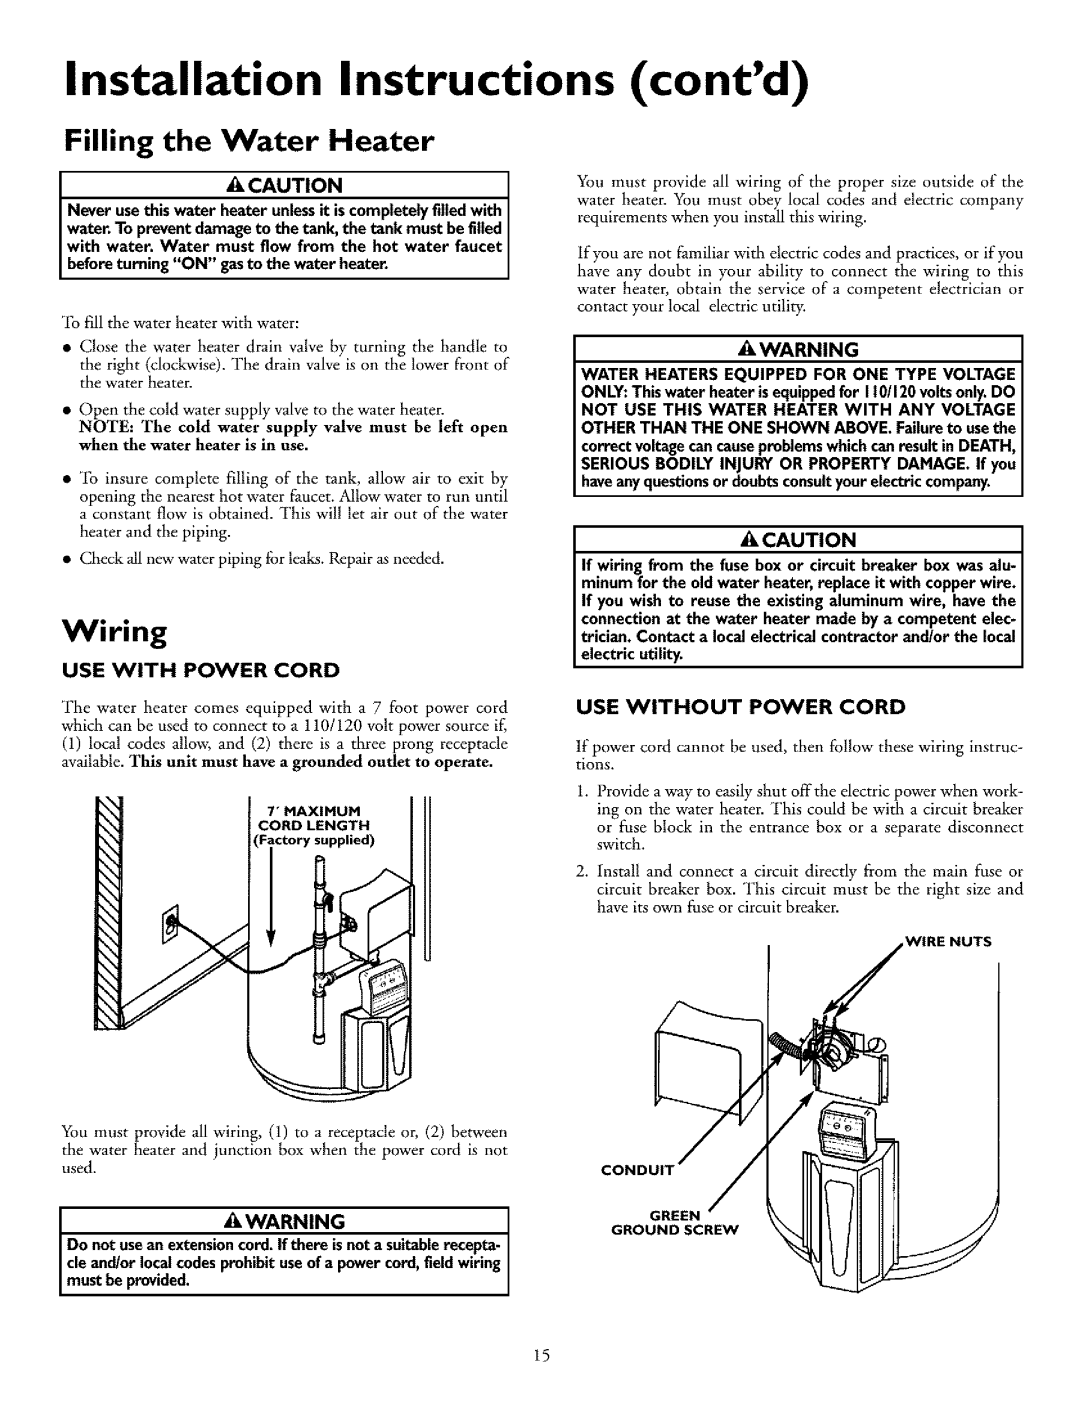 Kenmore 153.332960HA Filling the Water Heater, Wiring, Installation Instructions contd, A Caution, Use With Power Cord 